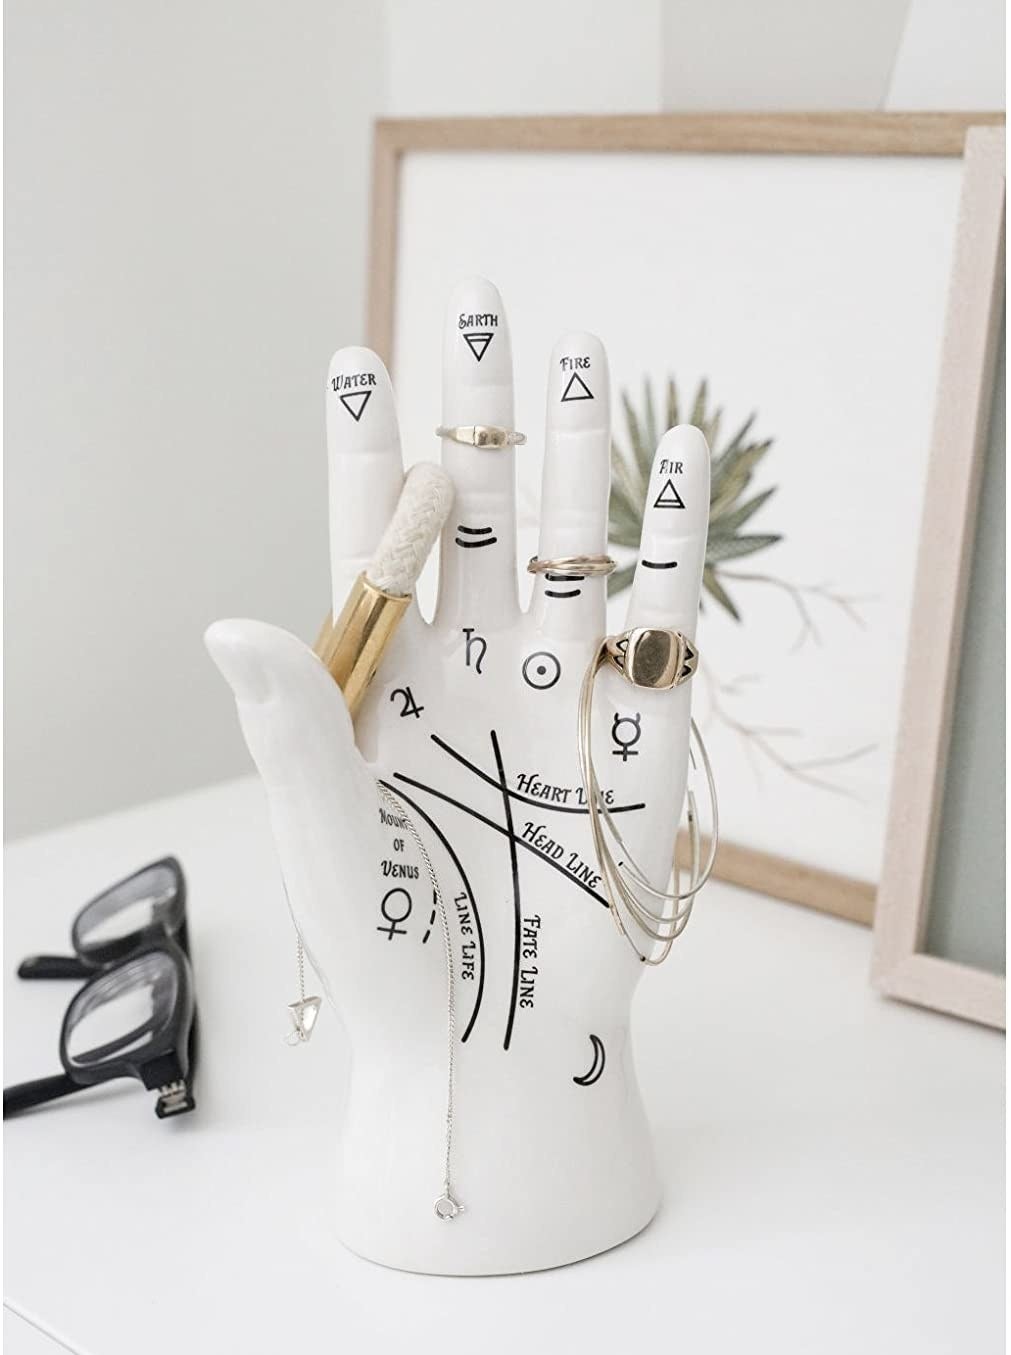 The palm-shaped jewelry stand on a vanity, holding rings, necklaces, and other jewelry